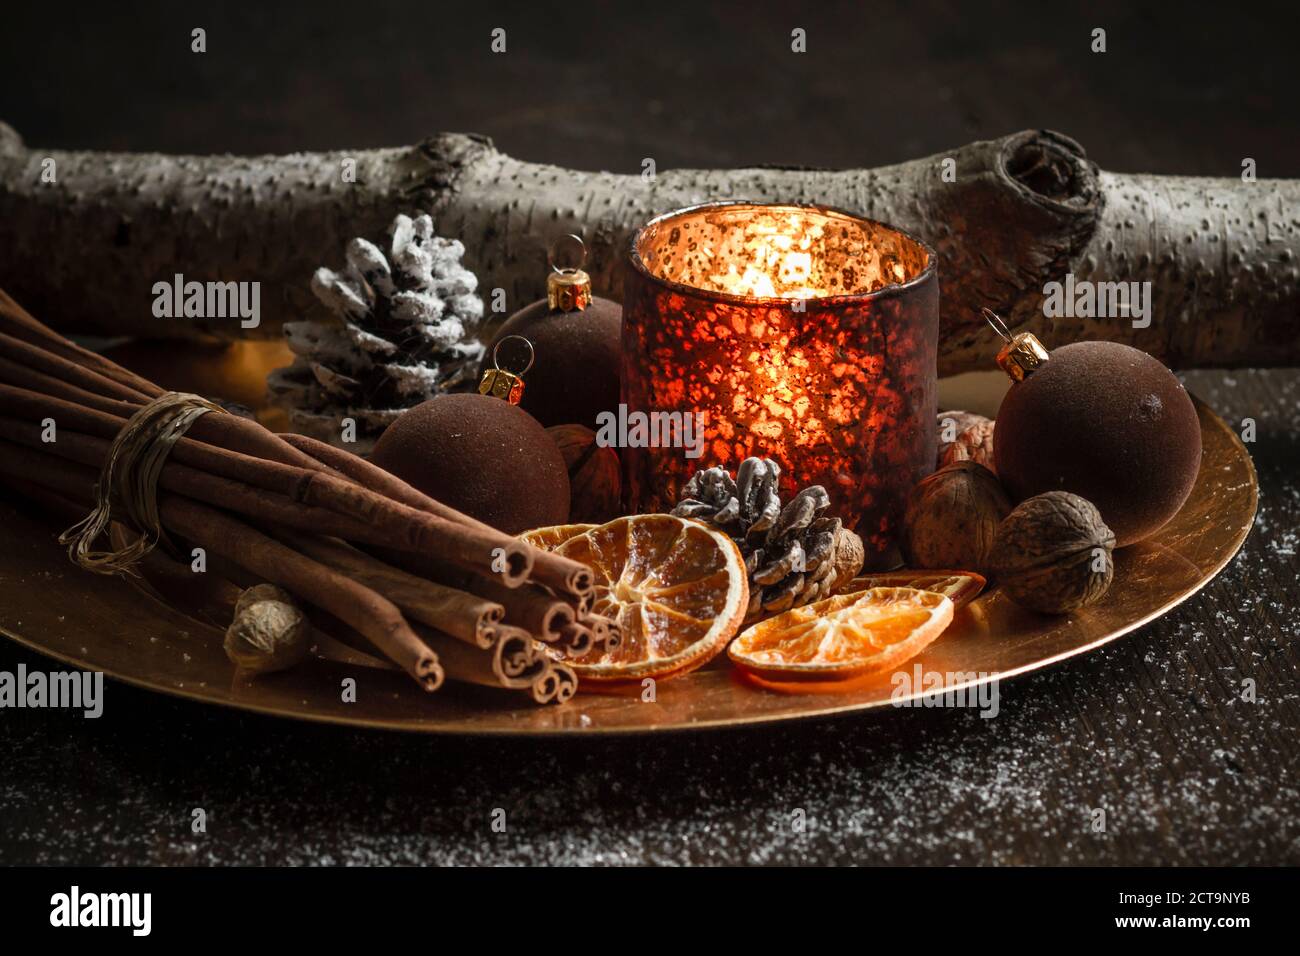 Christmas decoration with tea light candle, christmas tree balls, cinnamon sticks, slices of dried oranges and walnuts on plate, studio shot Stock Photo